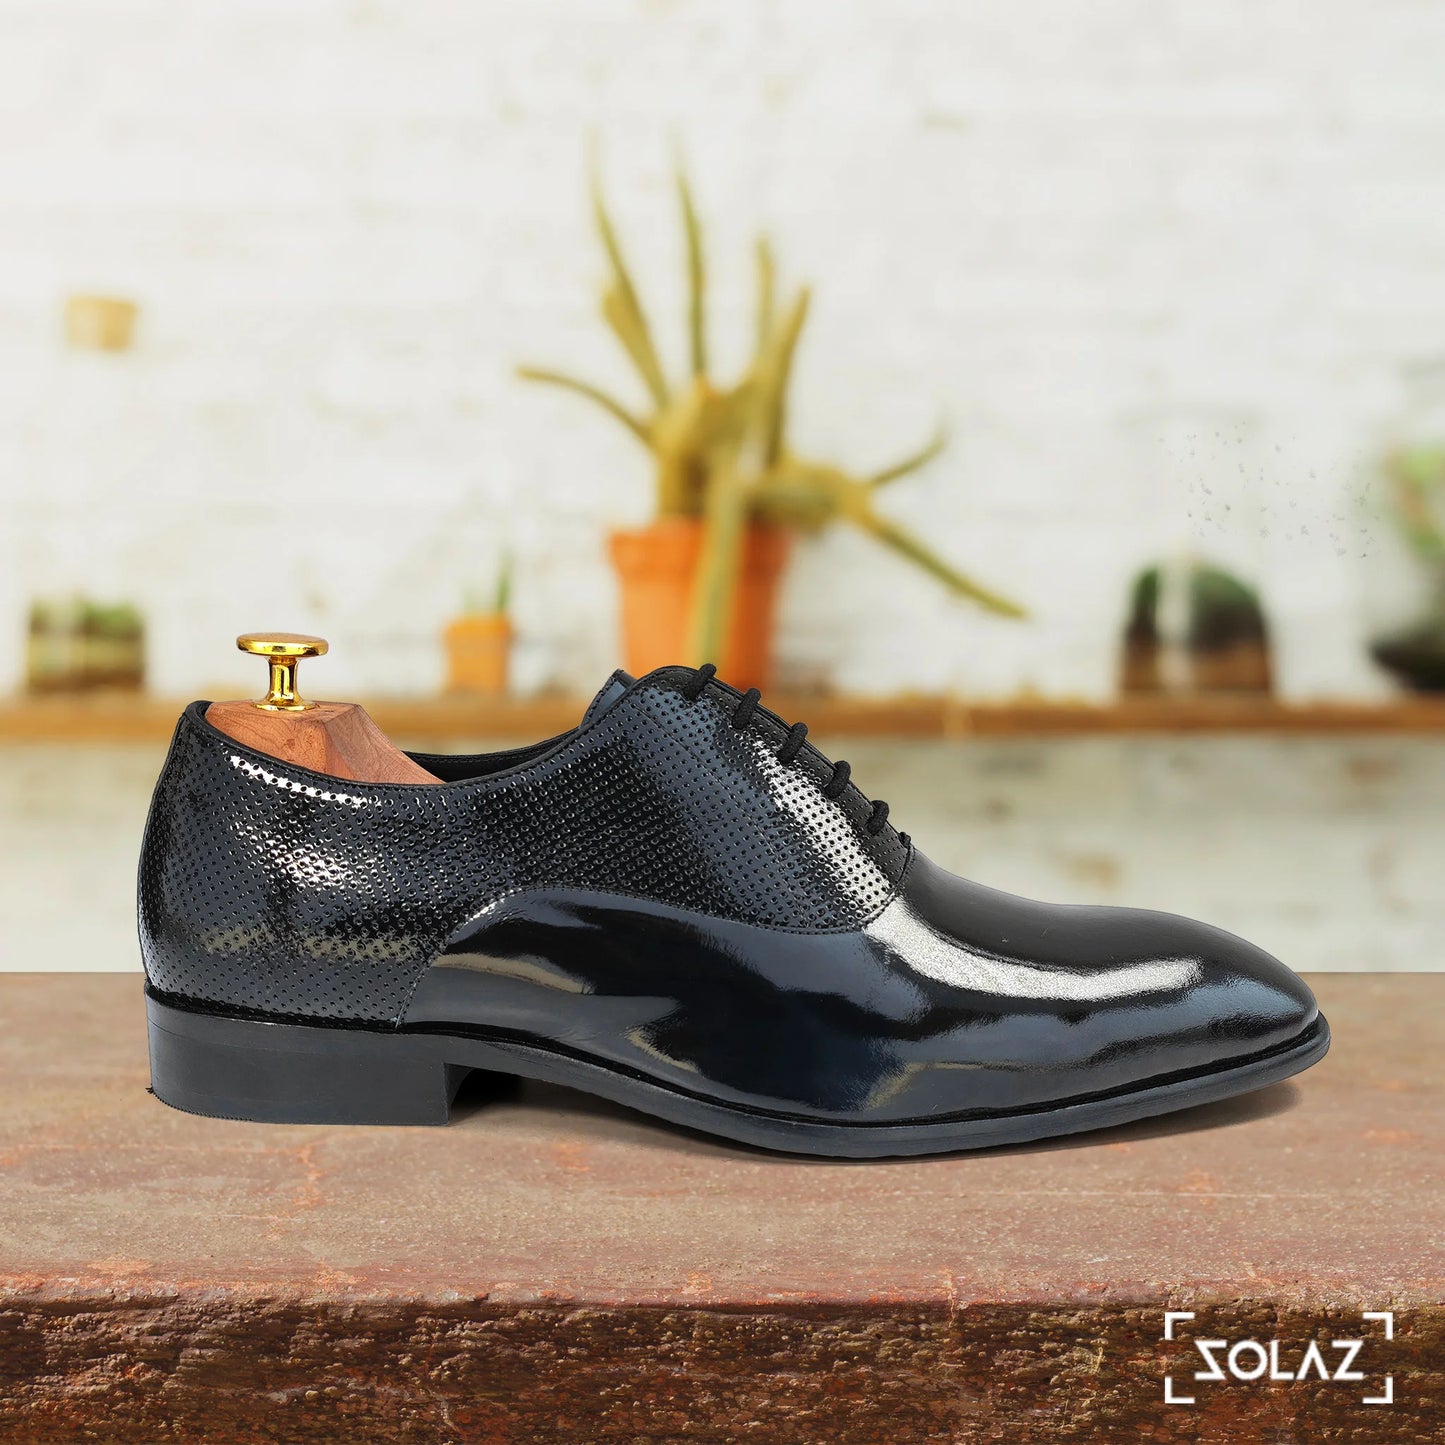 Solaz Black Patent Dress Oxford Shoes Made of Real Leather for Men